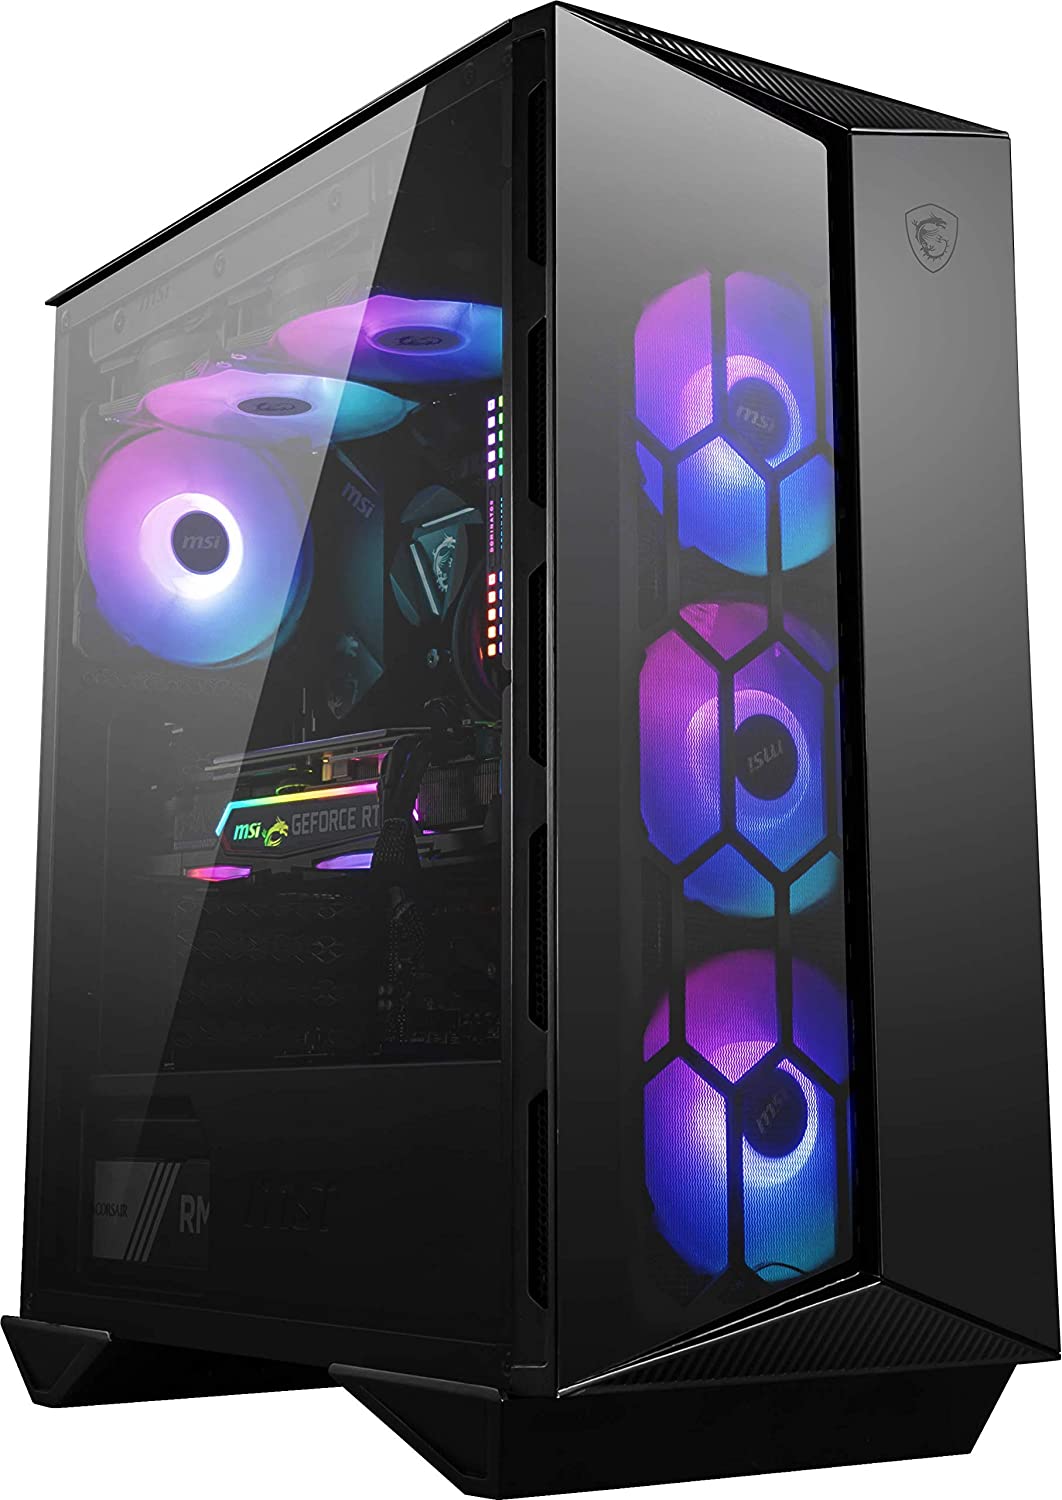 MSI Premium Mid-Tower PC Gaming Case – Tempered Glass Side Panel – RGB 120mm Fan – Liquid Cooling Support up to 360mm Radiator x 1 – Cable Management System – MPG GUNGNIR 110R